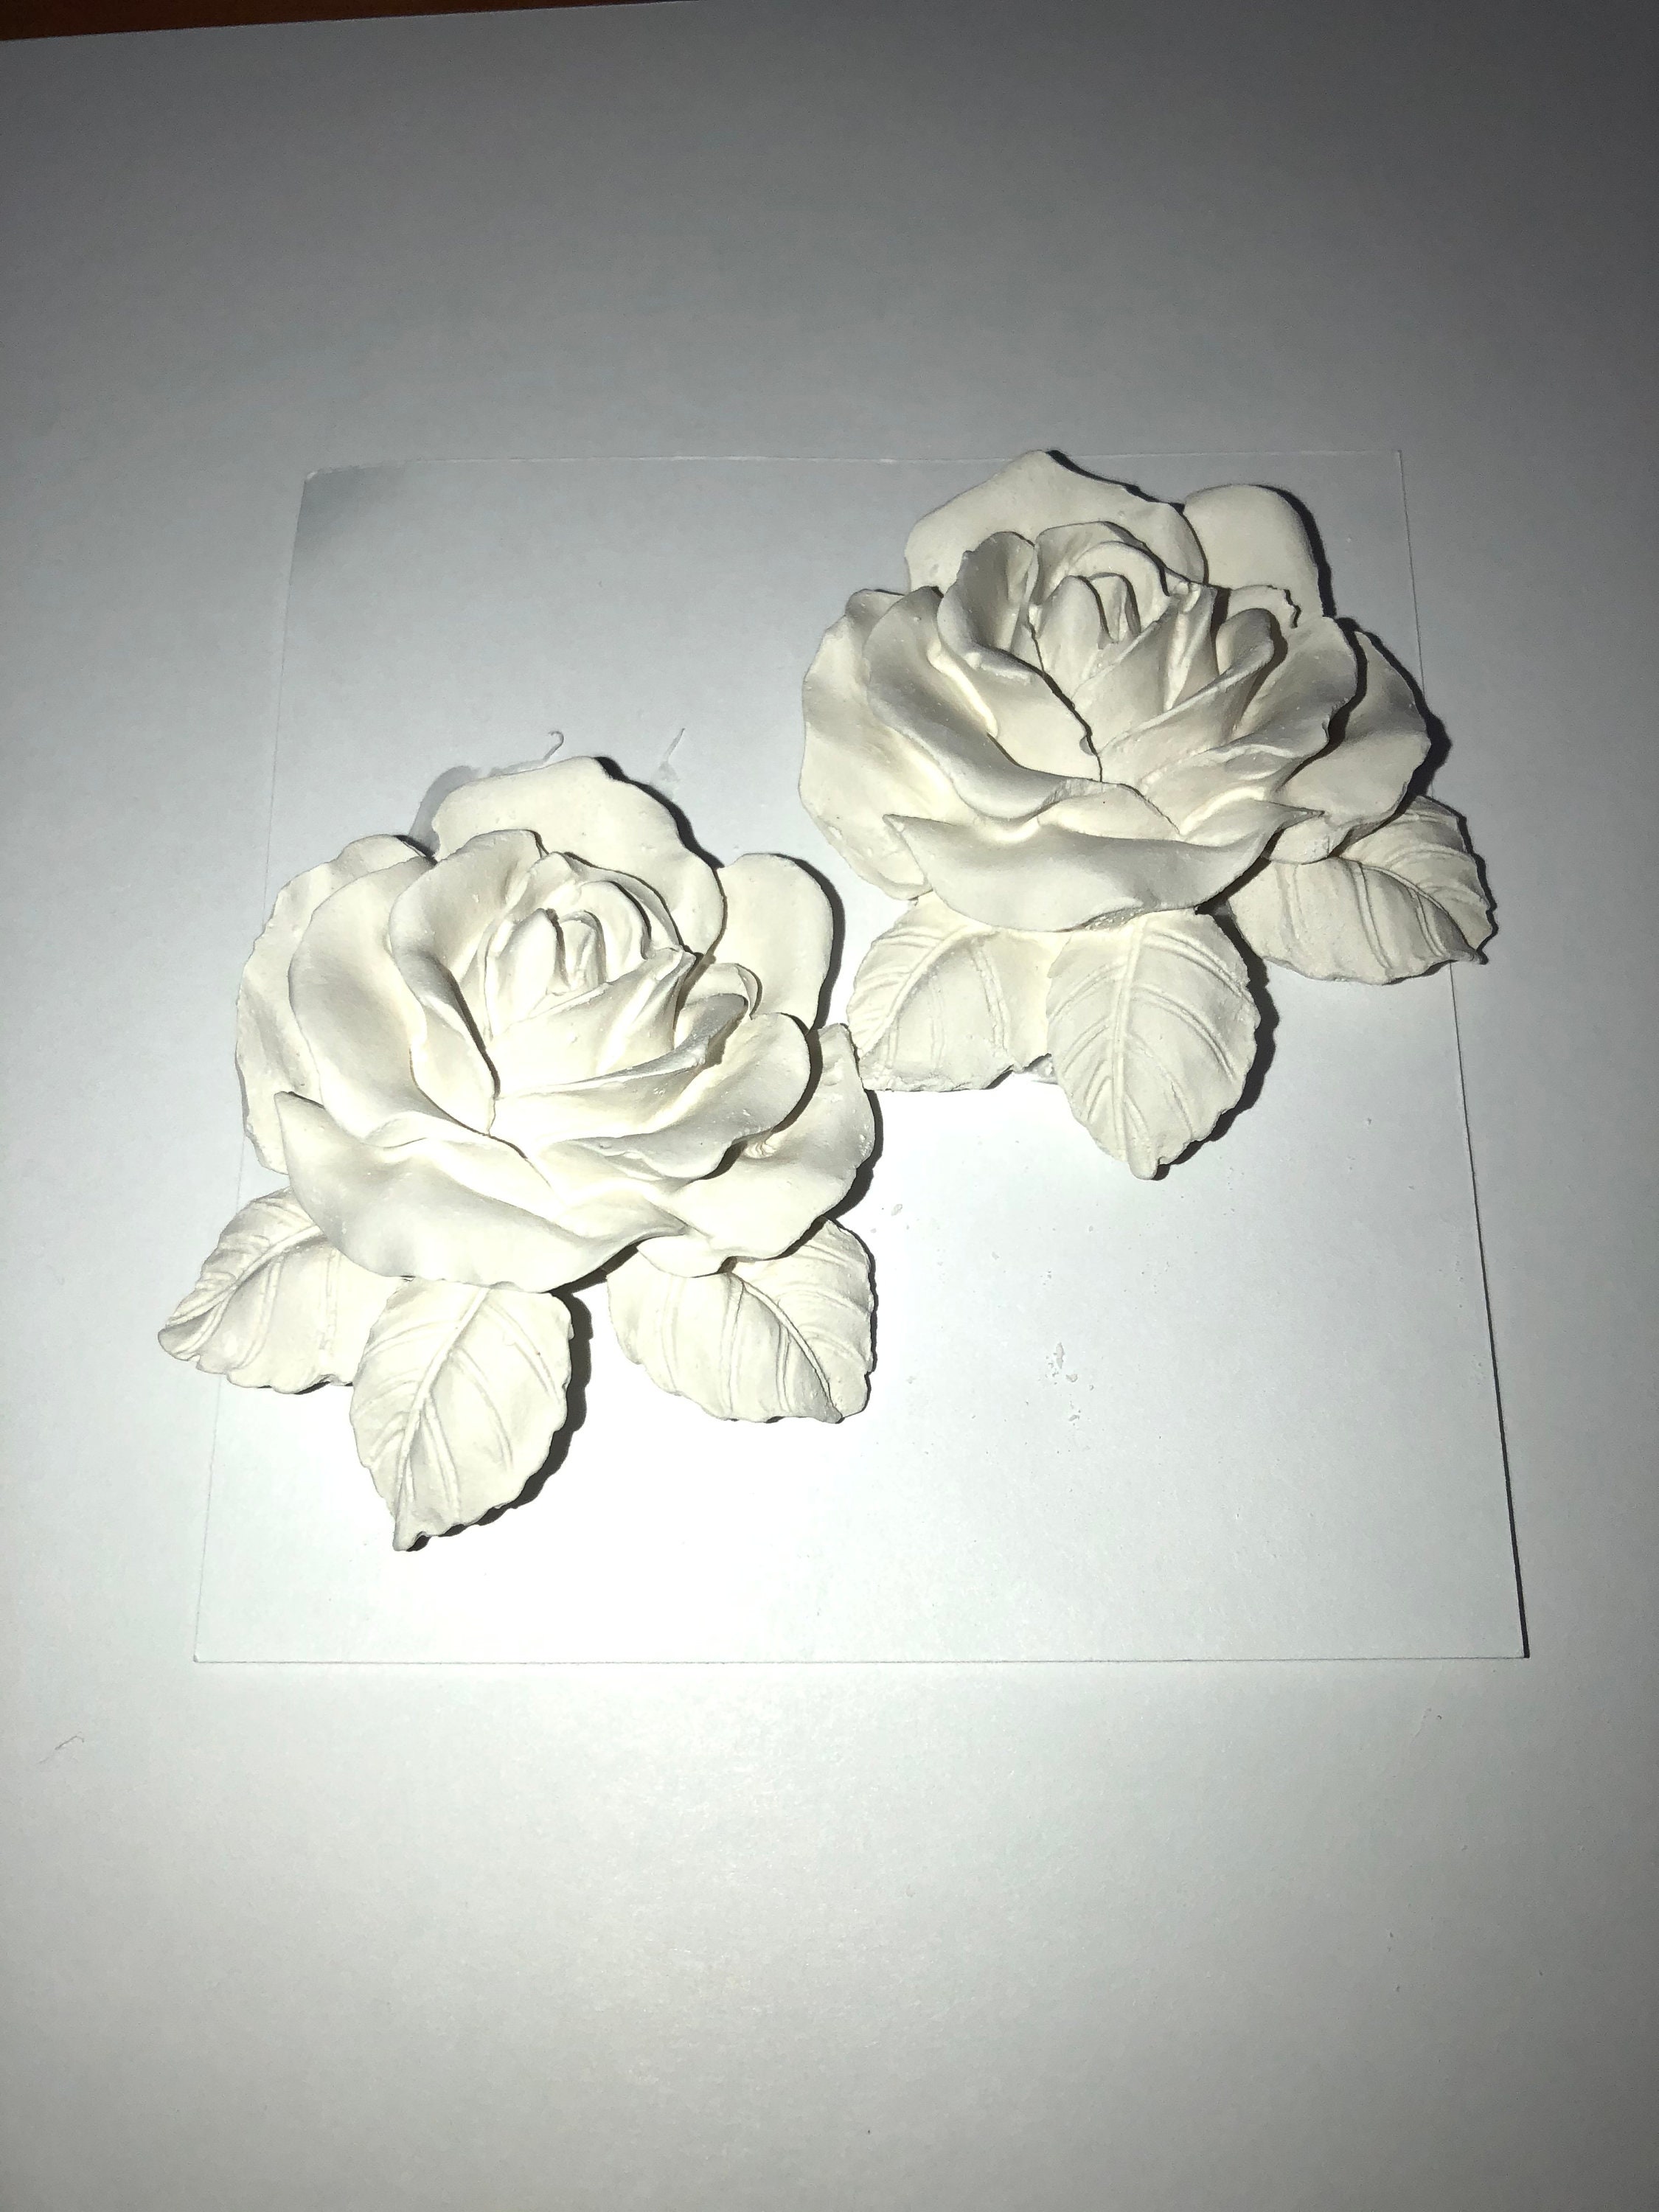 Flower tiles plaster of Paris painting project! Set of 6. Check it out!